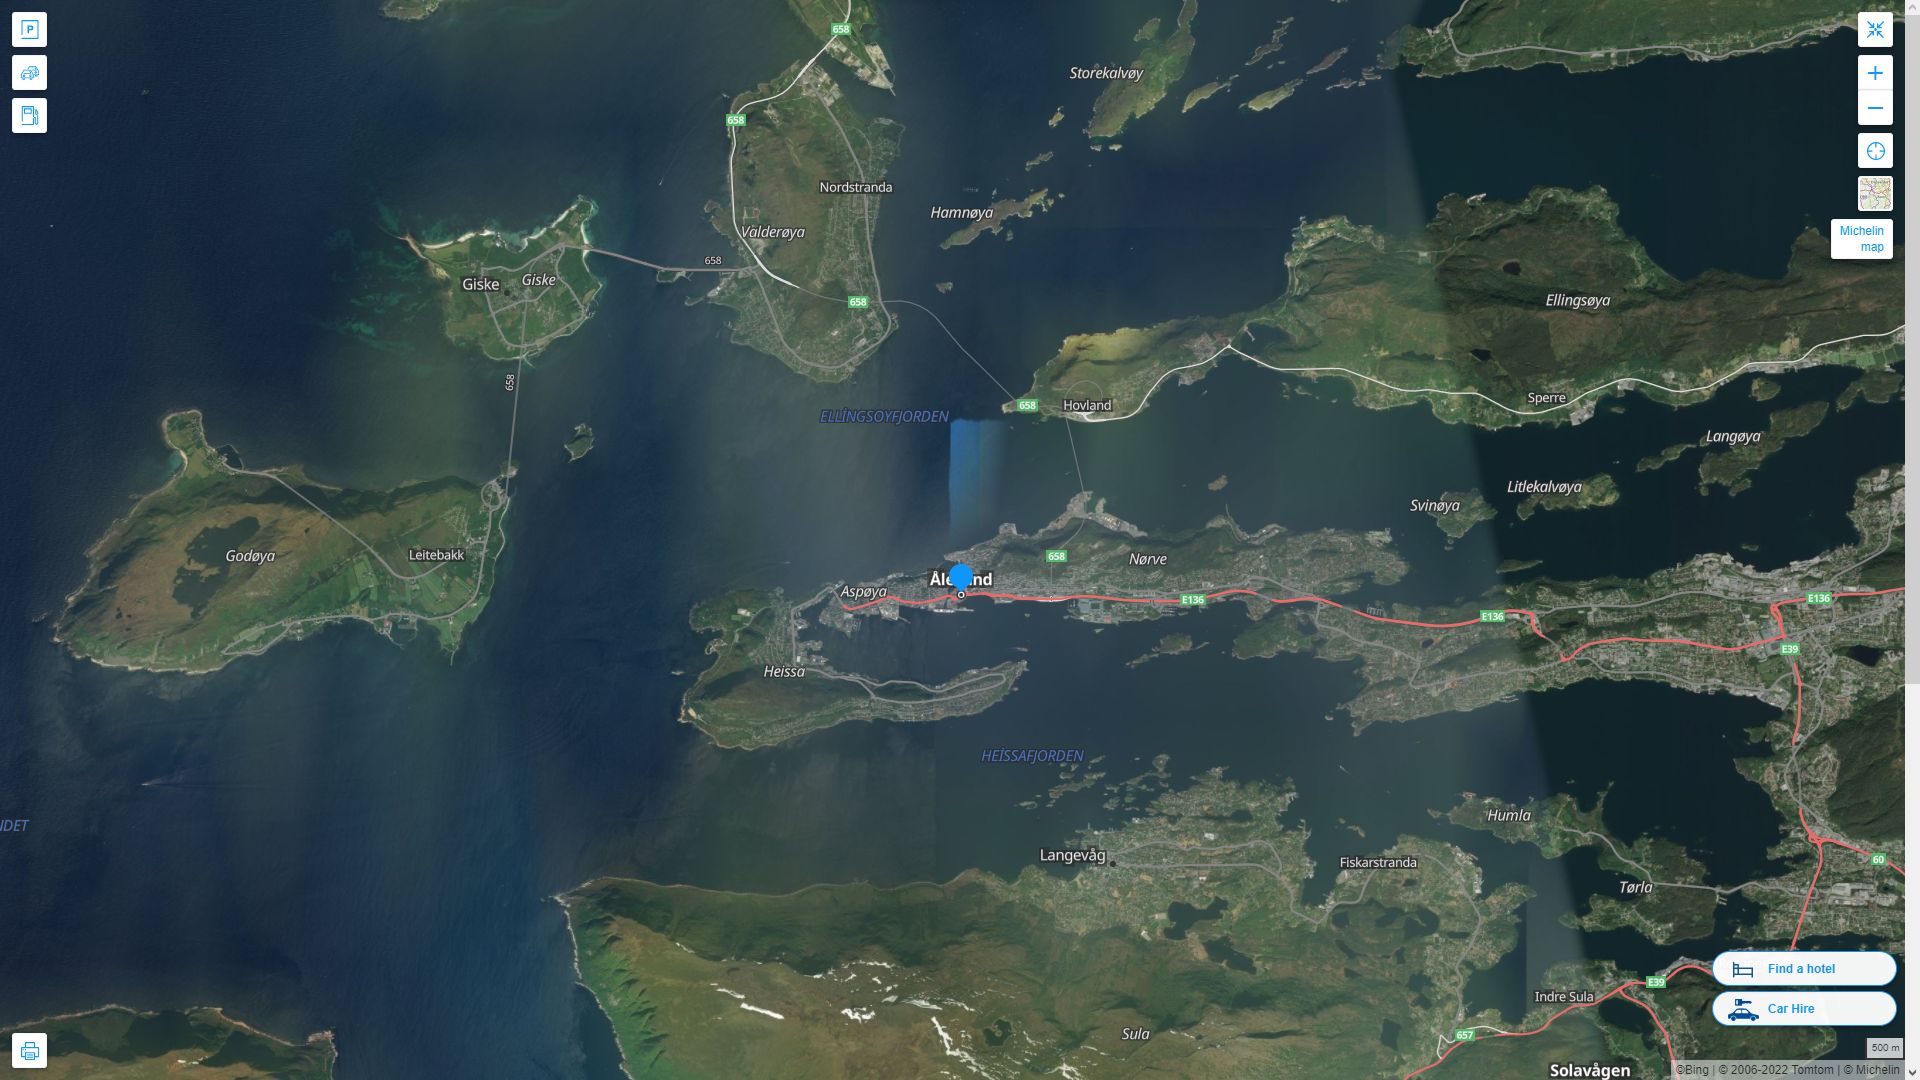 Alesund Highway and Road Map with Satellite View